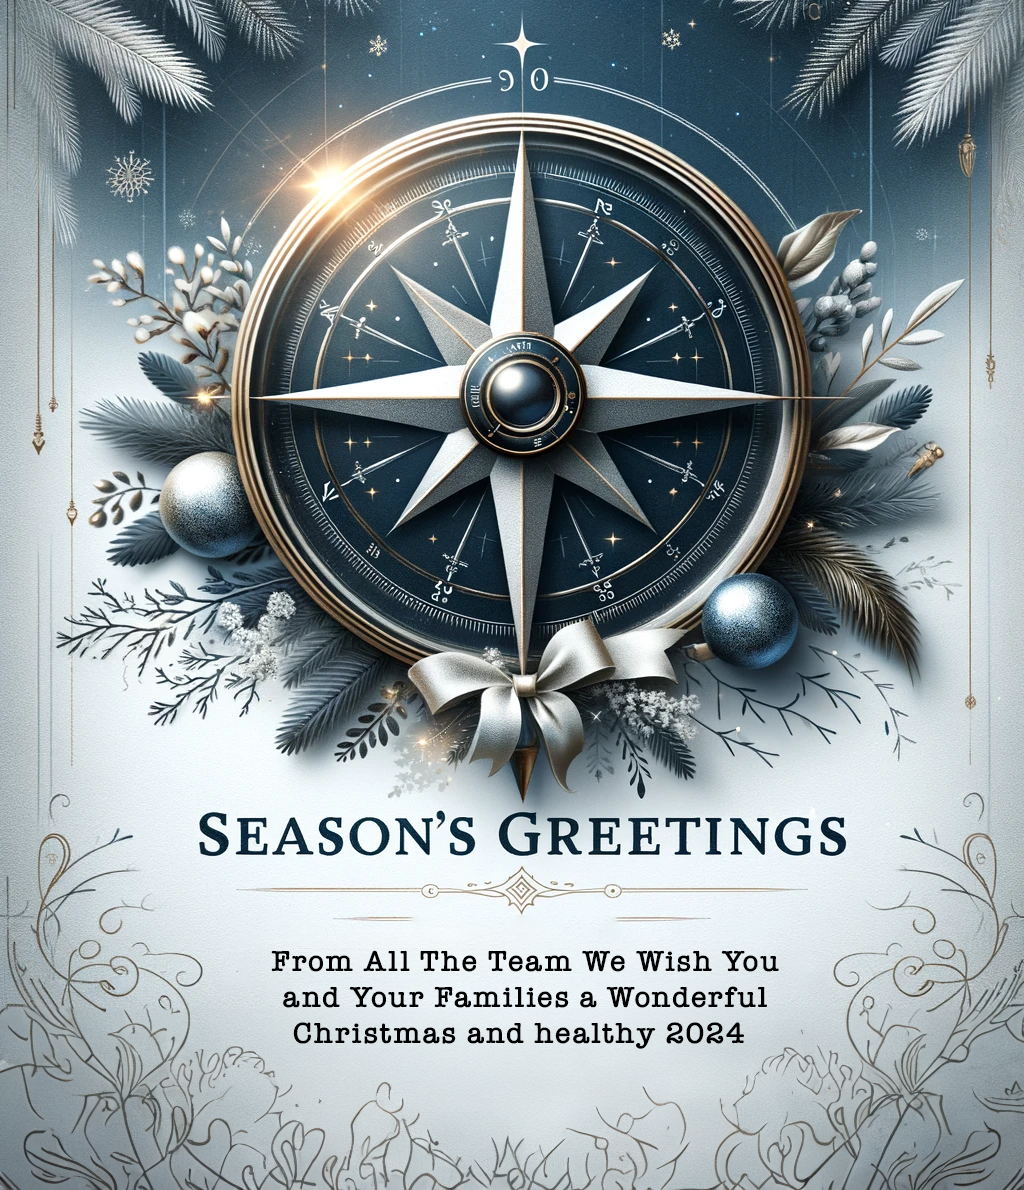 Season’s Greetings to Our Esteemed Industry Colleagues